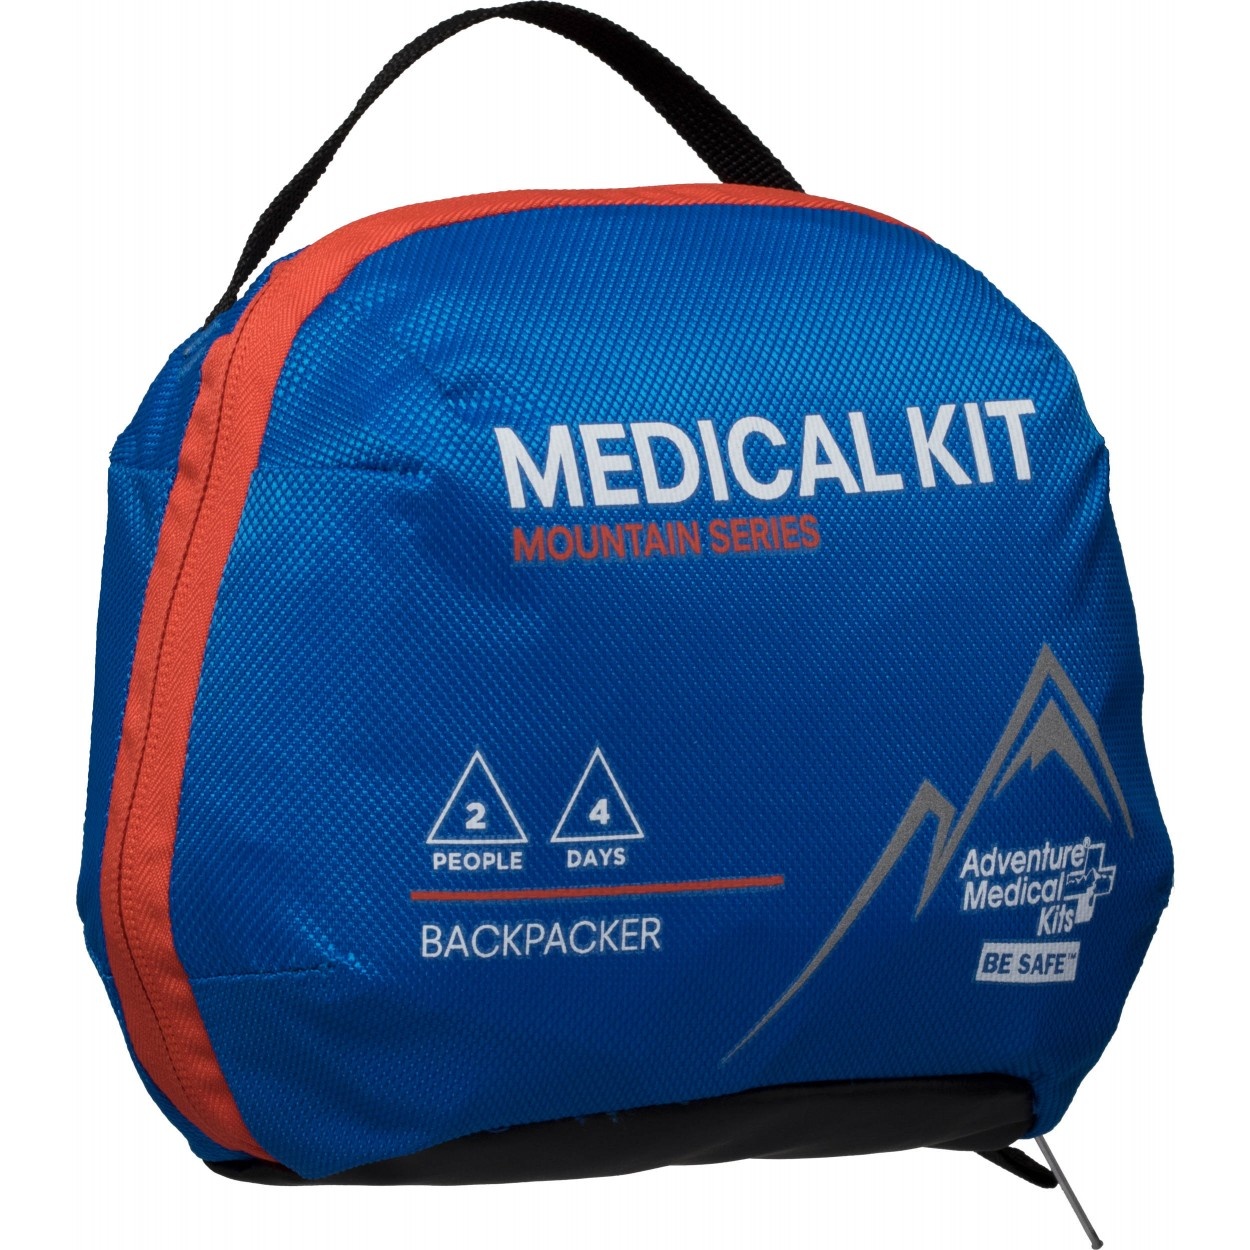 Adventure Medical Kits Mountain Series Backpacker Kit First Aid